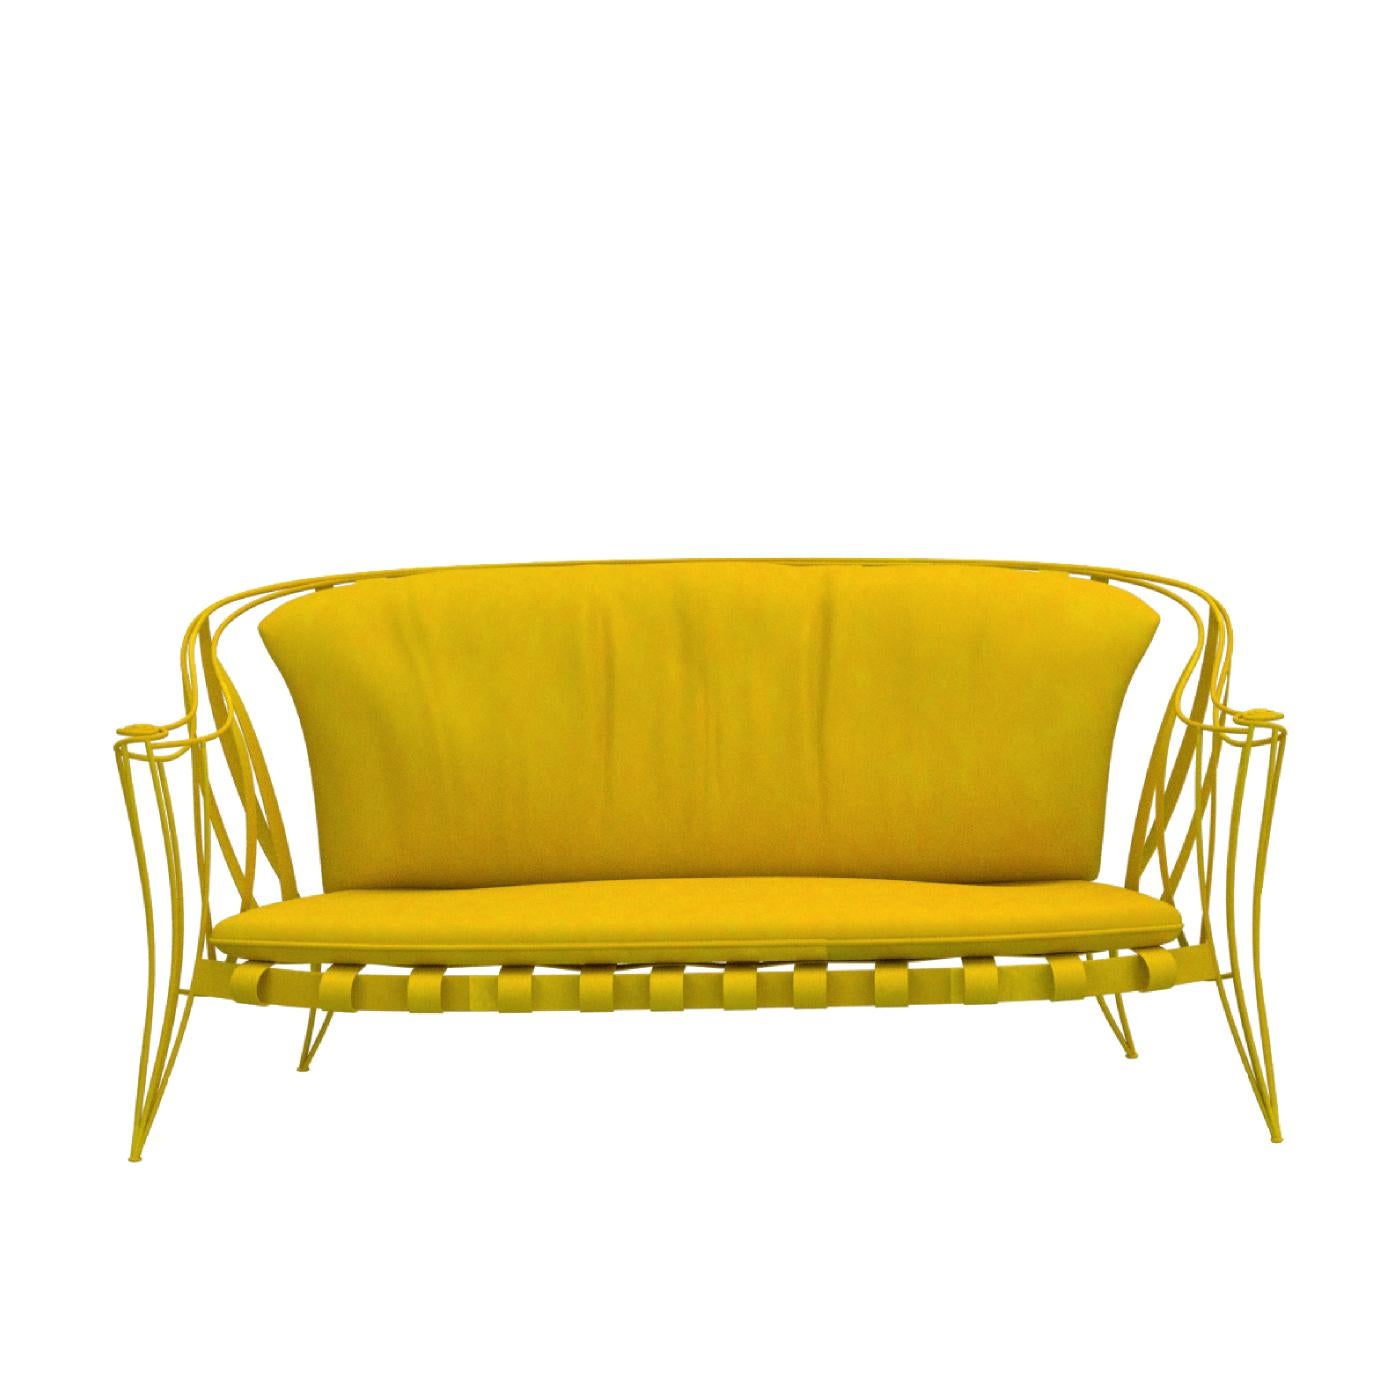 A fine example of skilled craftsmanship and innovative design, this outdoor sofa boasts a highly graphic and sculptural design that will stand out in a modern garden, patio, and pool area. The frame consists of iron rods bent by hand to form a